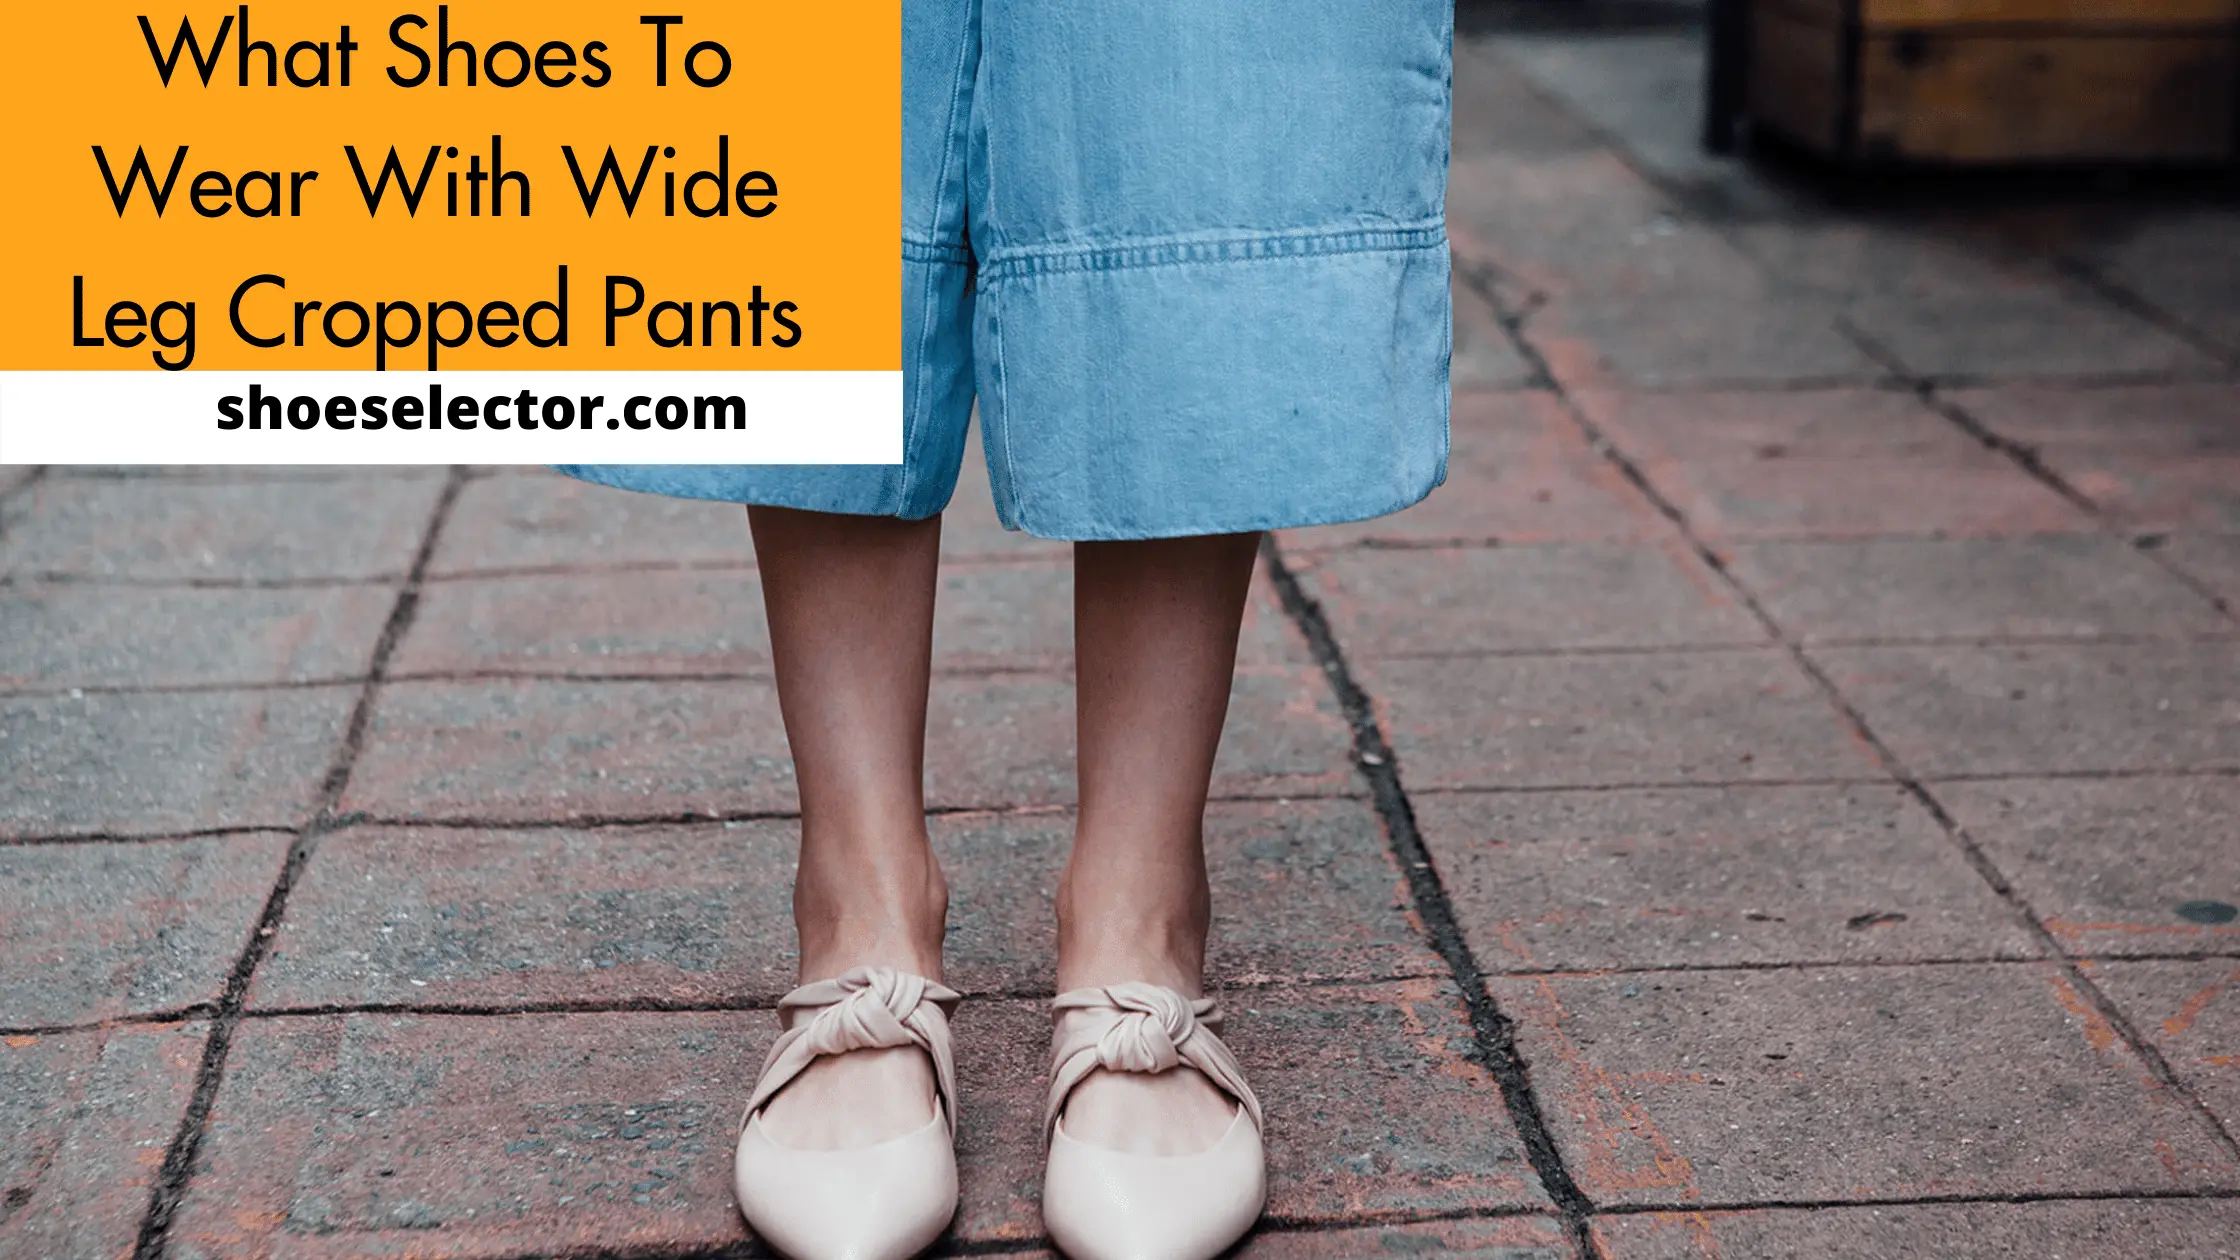 What Shoes To Wear With Wide Leg Cropped Pants? Pro Guide